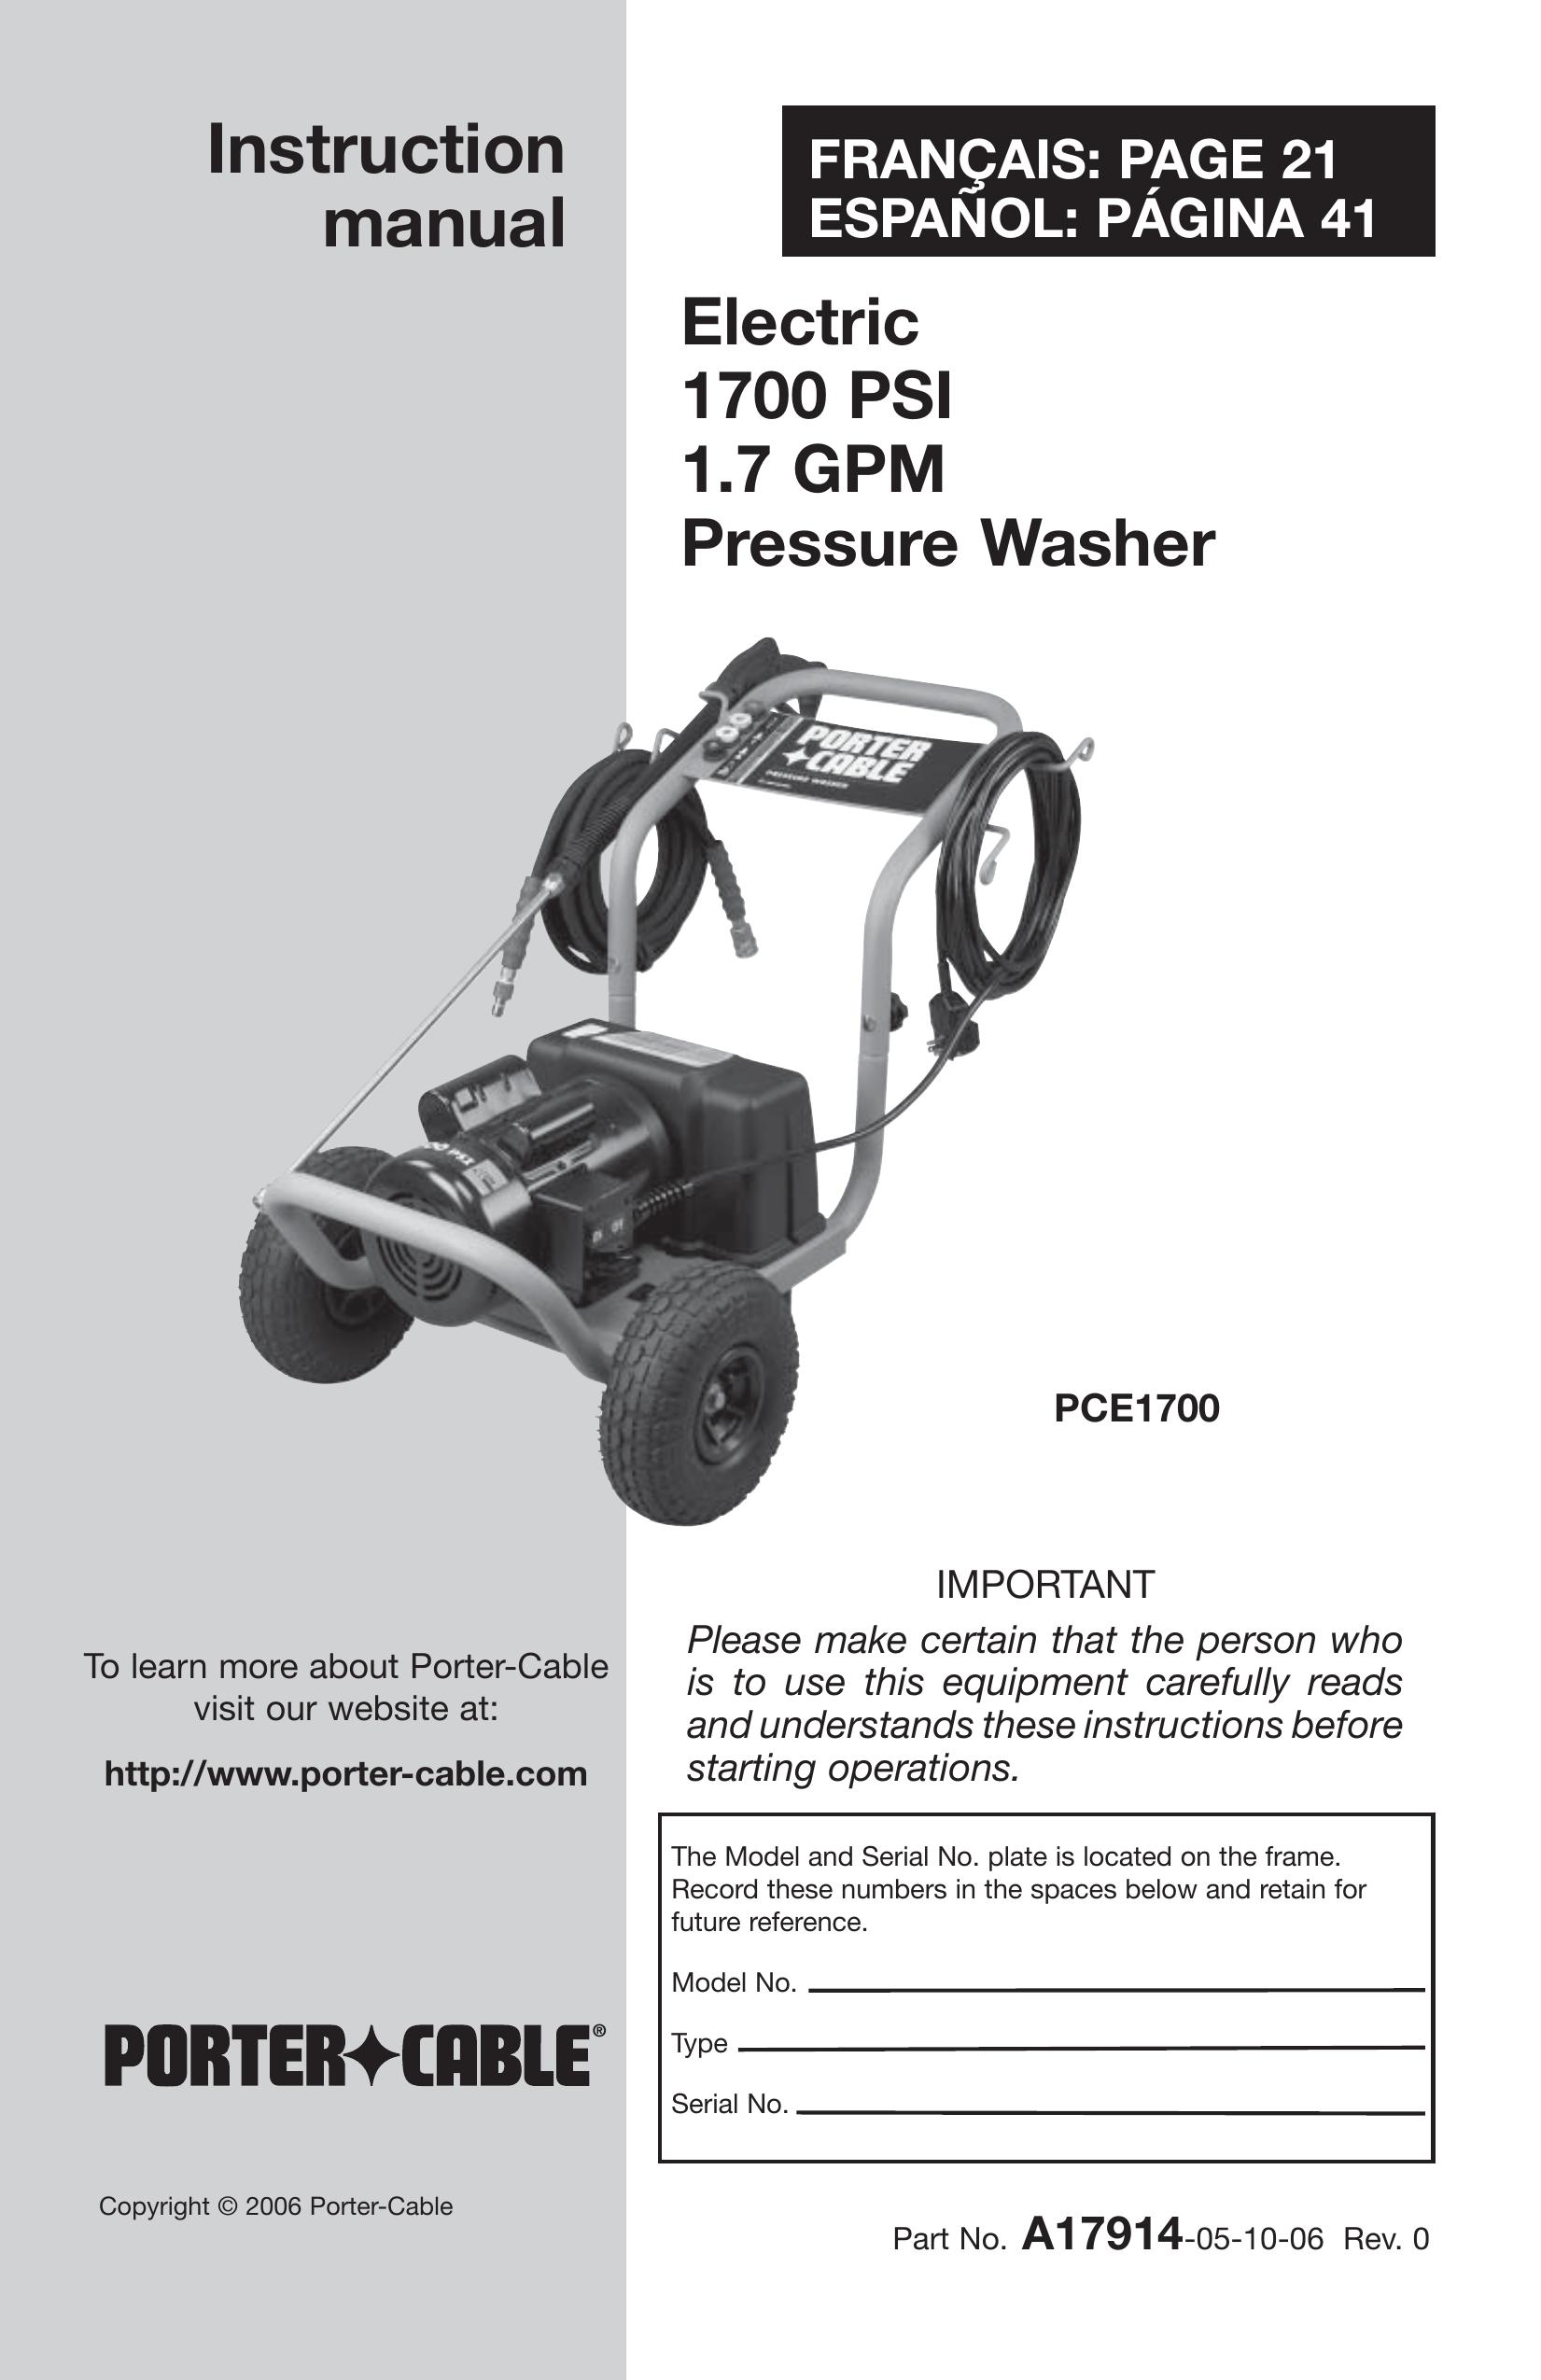 Porter-Cable A17914-05-10-06 Pressure Washer User Manual